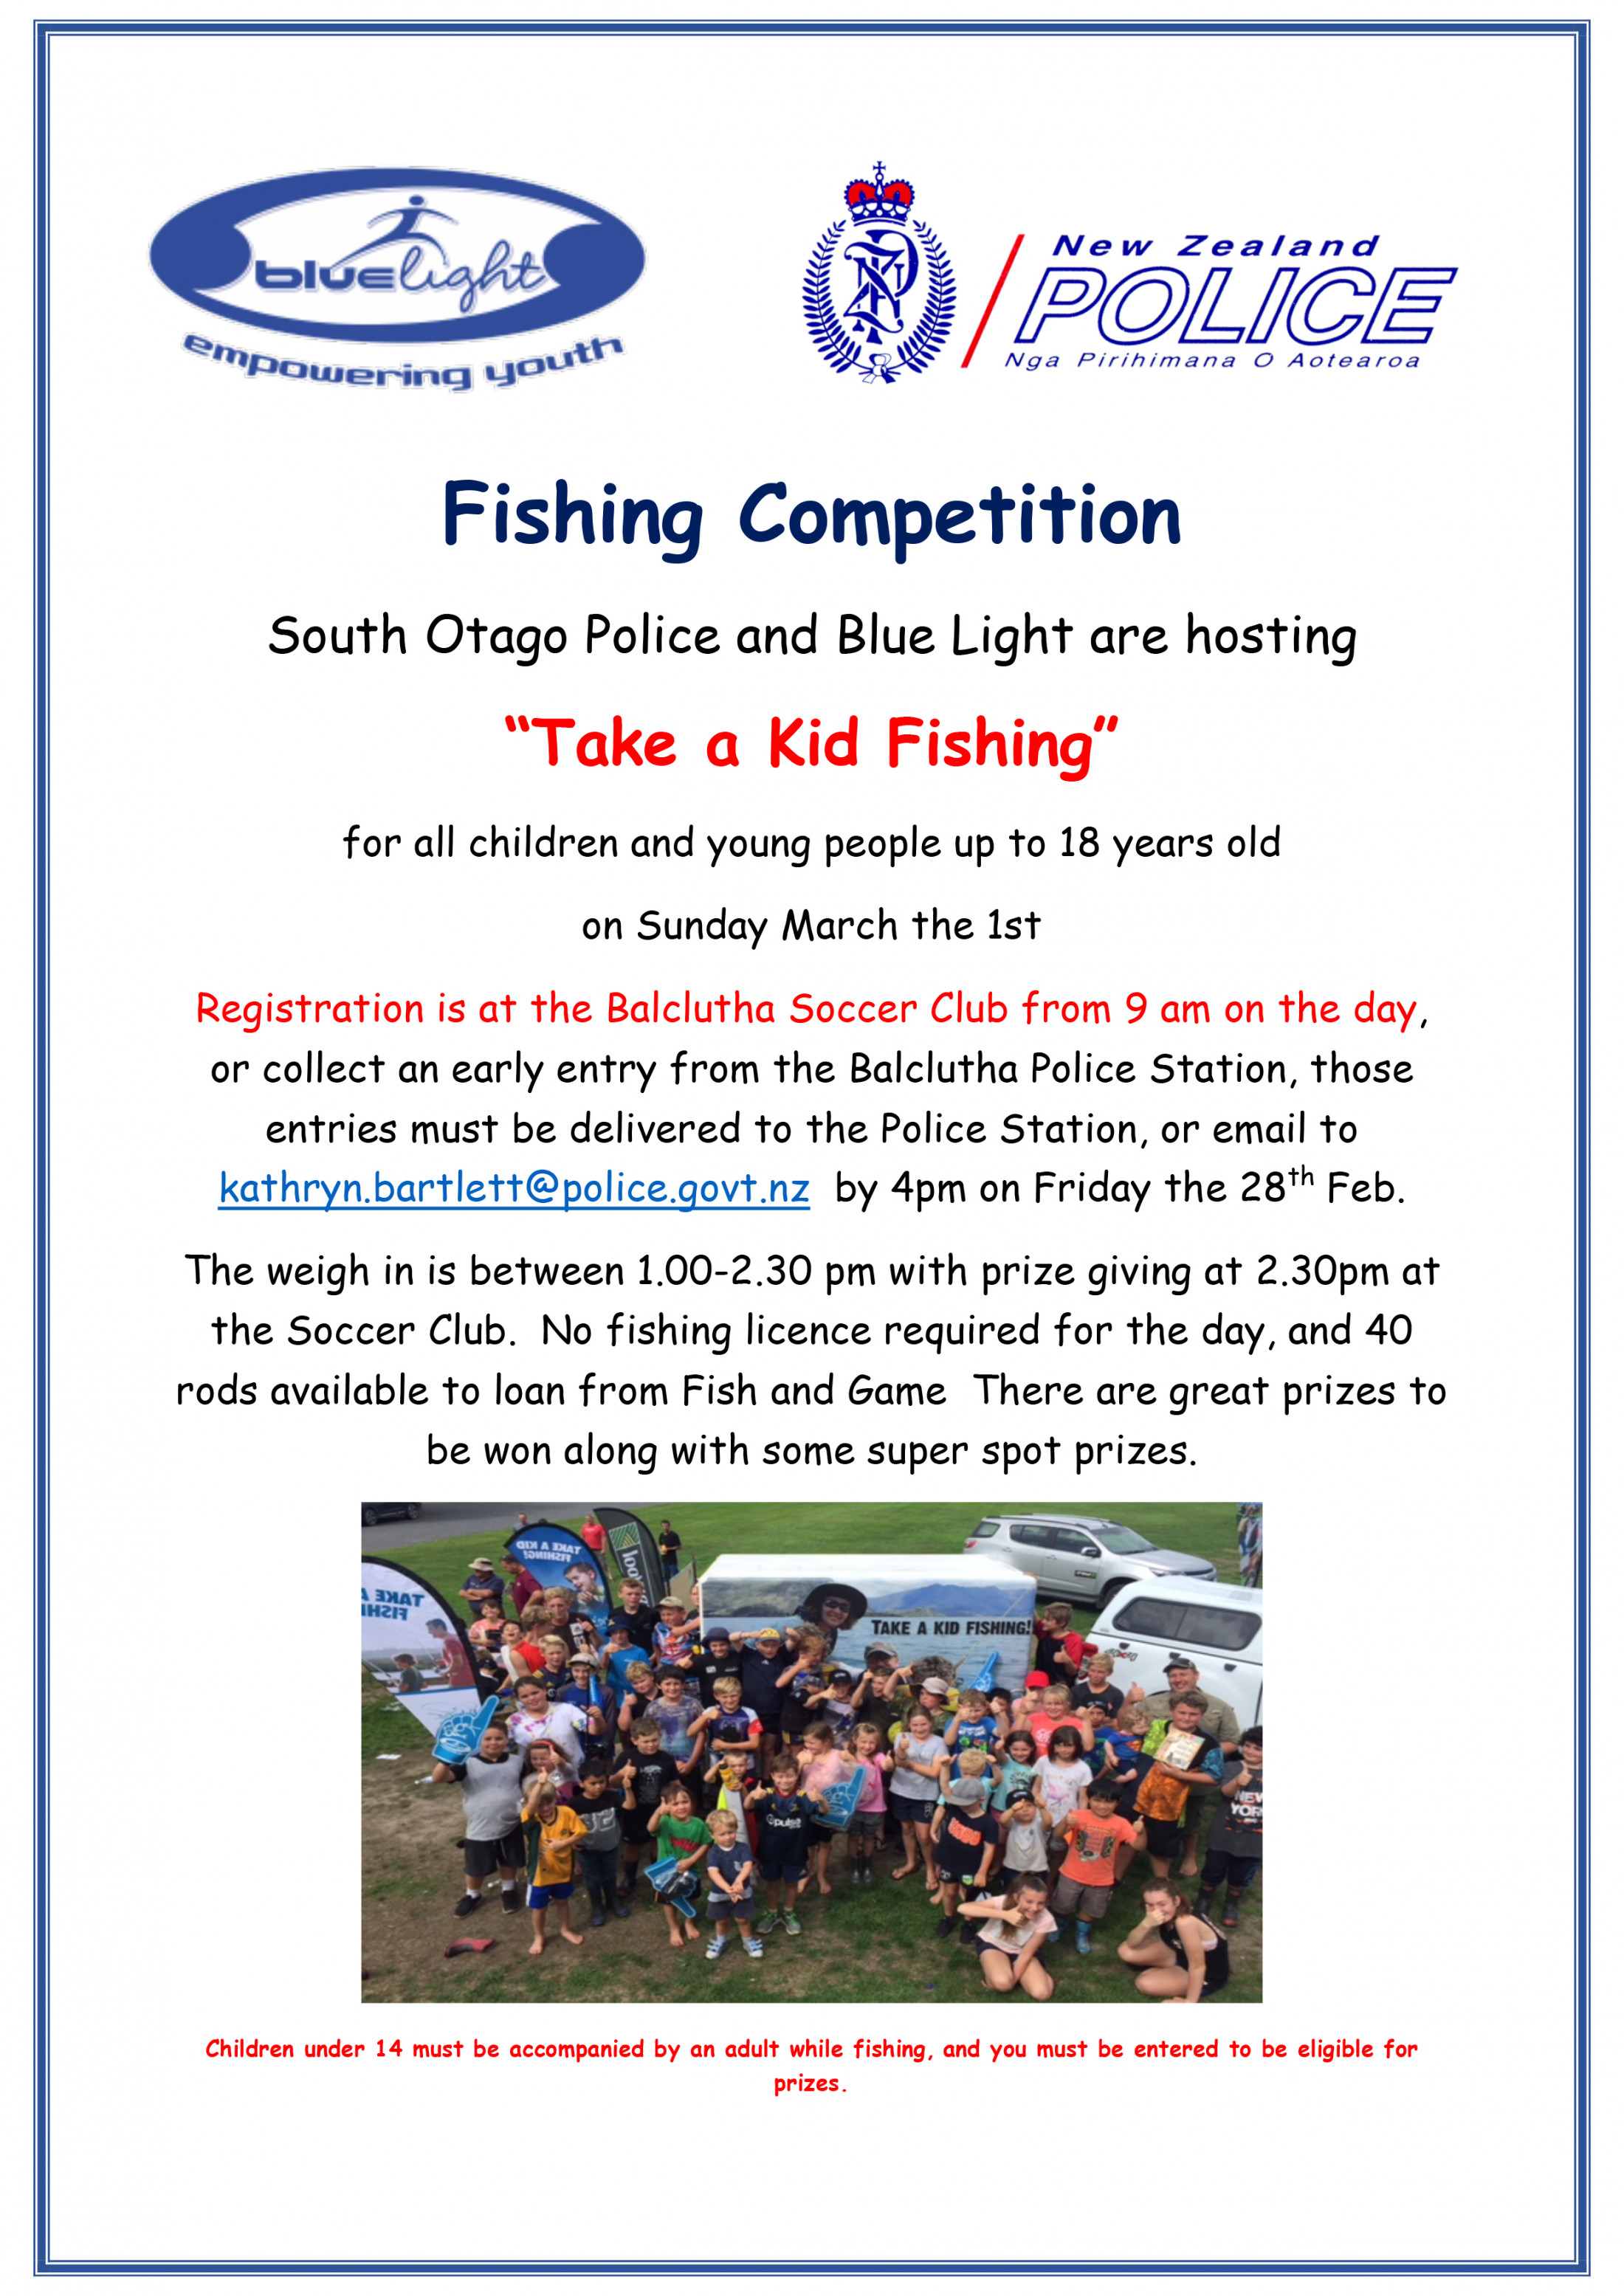 Fishing Competition Poster 2020